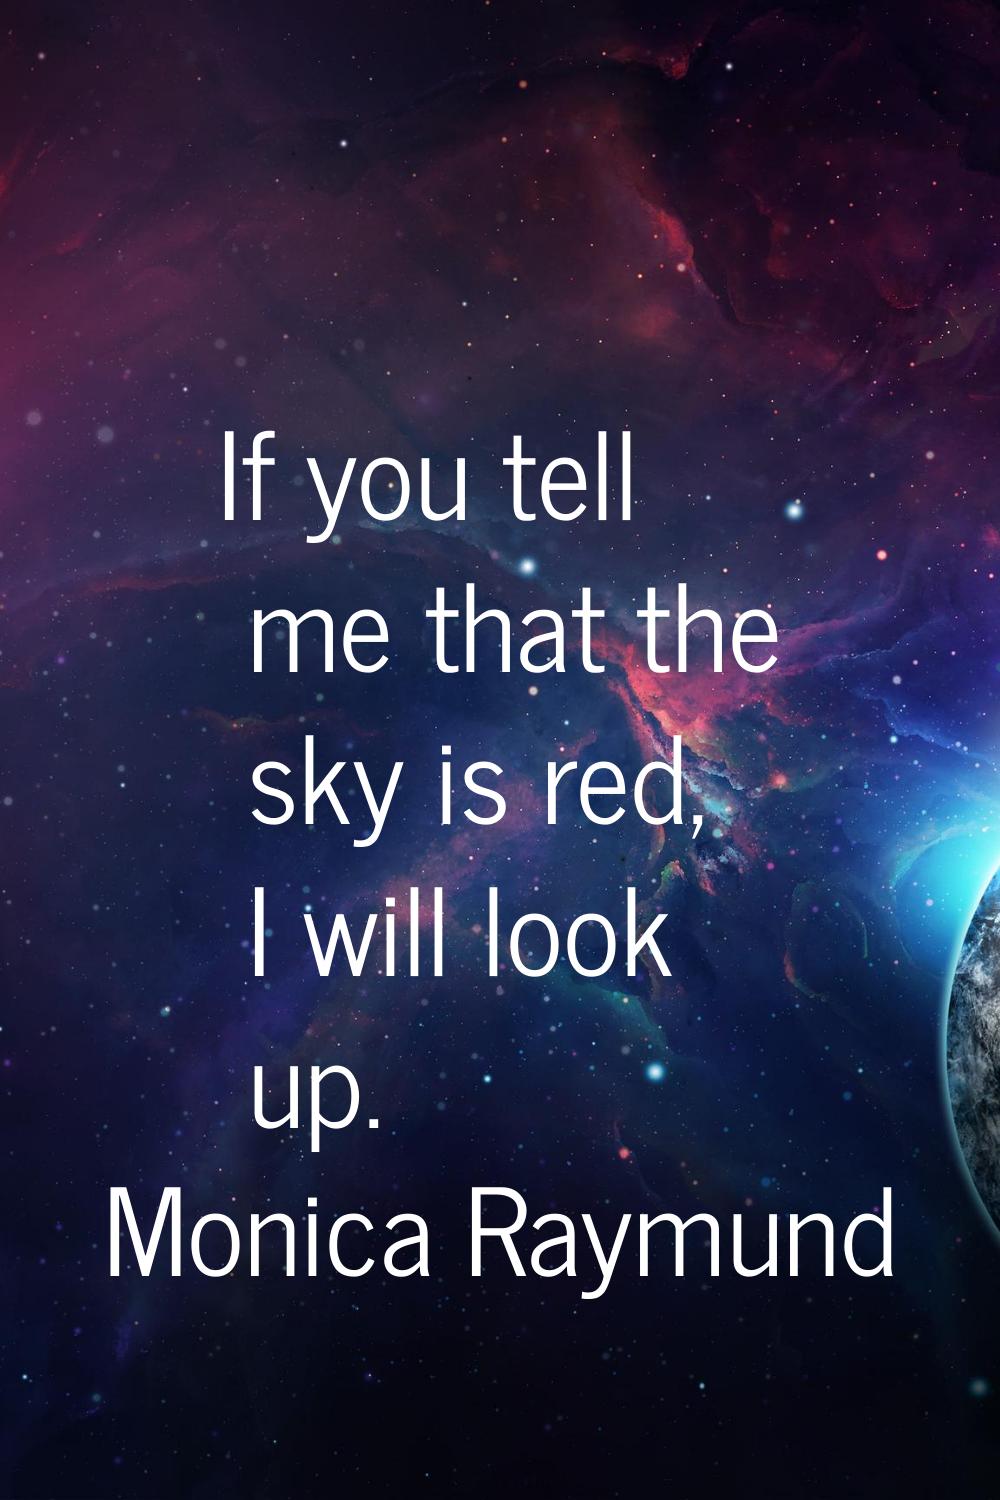 If you tell me that the sky is red, I will look up.